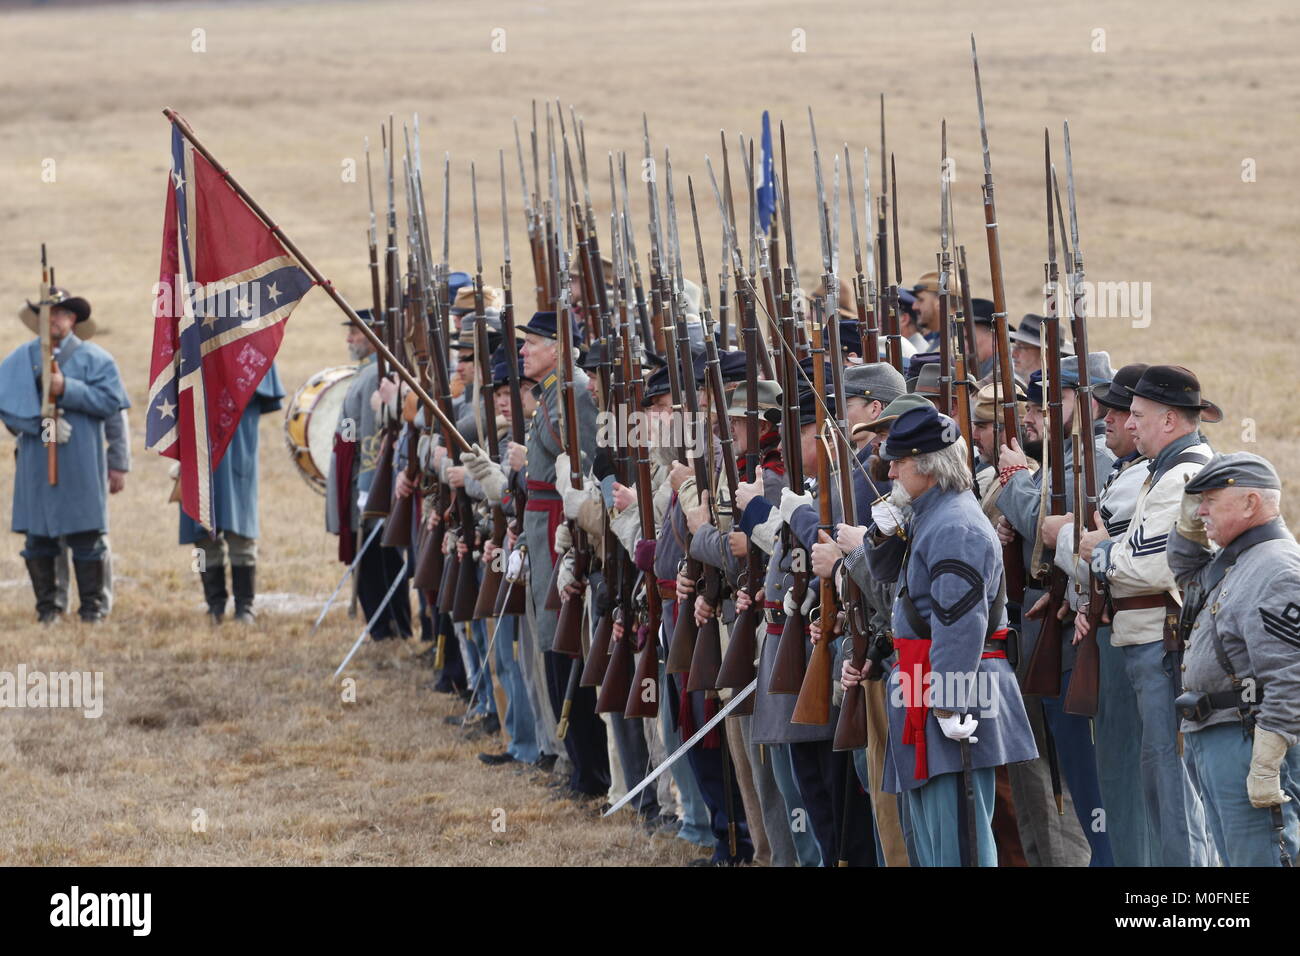 Confederate soldiers at Civil War Re-enactment of a battle that happened in Hernando County, Florida in July of l864. Stock Photo